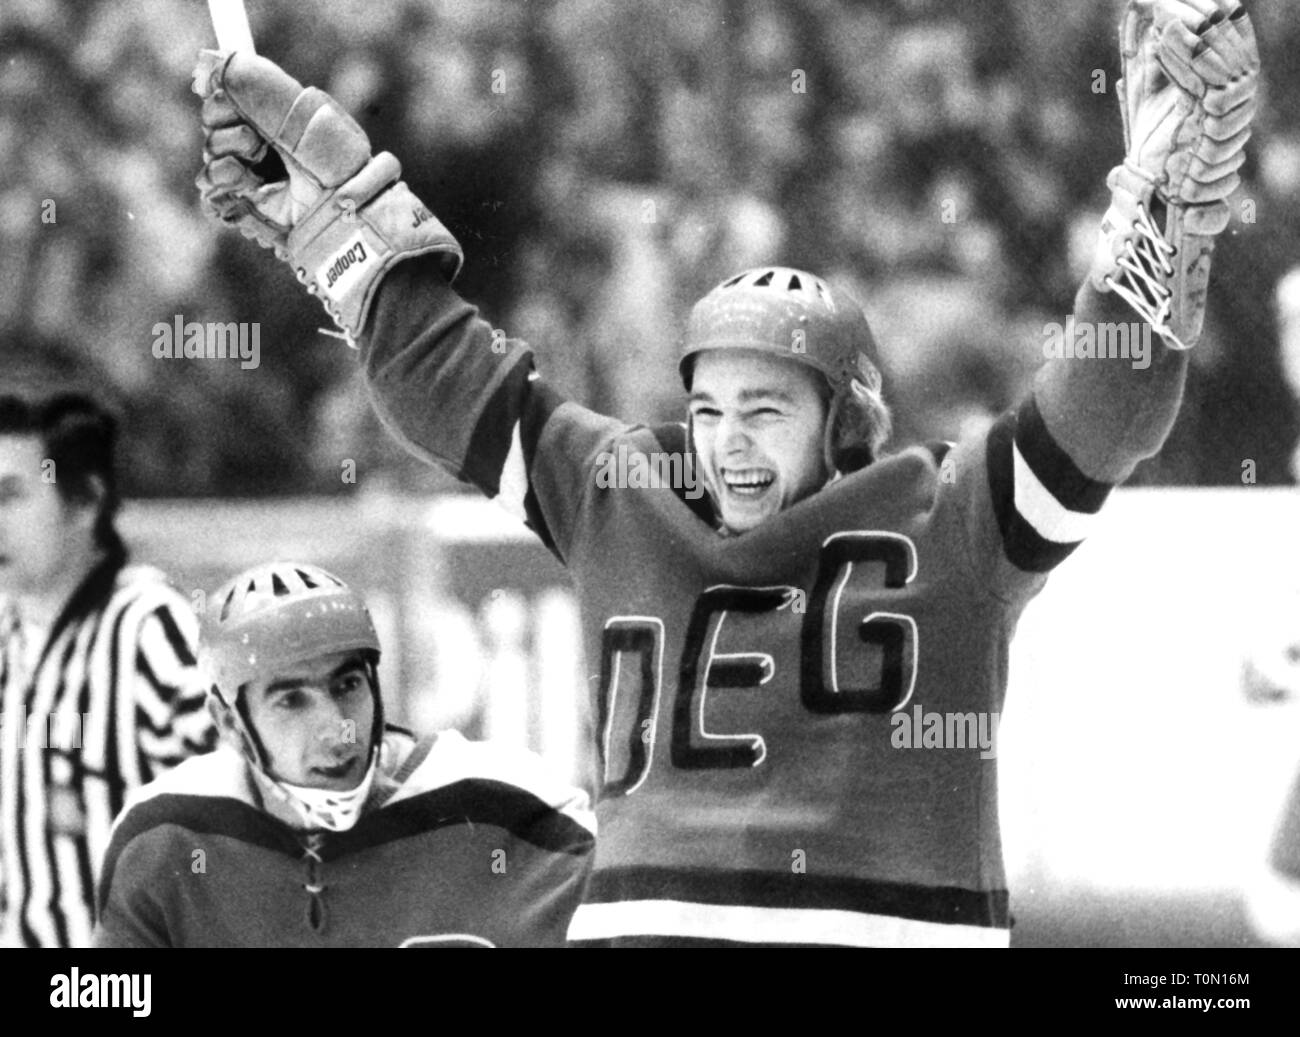 sports, winter sports, ice hockey, game, national league, season 1971/1972, Duesseldorfer EG versus EV Fuessen, striker Walter Koeberle (DEG) is jubilating about the 4: 2, left: Otto Schneitberger, 30.10.1971, cheers, jubilation, jubilance, cheer, cheering, joy, happiness, happy, victory, victories, triumph, triumphs, athlete, athletes, ice-hockey player, ice-hockey players, Germany, 1970s, 70s, 20th century, people, men, man, male, ice hockey, hockey, game, games, national league, German professional football league, German professional soccer l, Additional-Rights-Clearance-Info-Not-Available Stock Photo